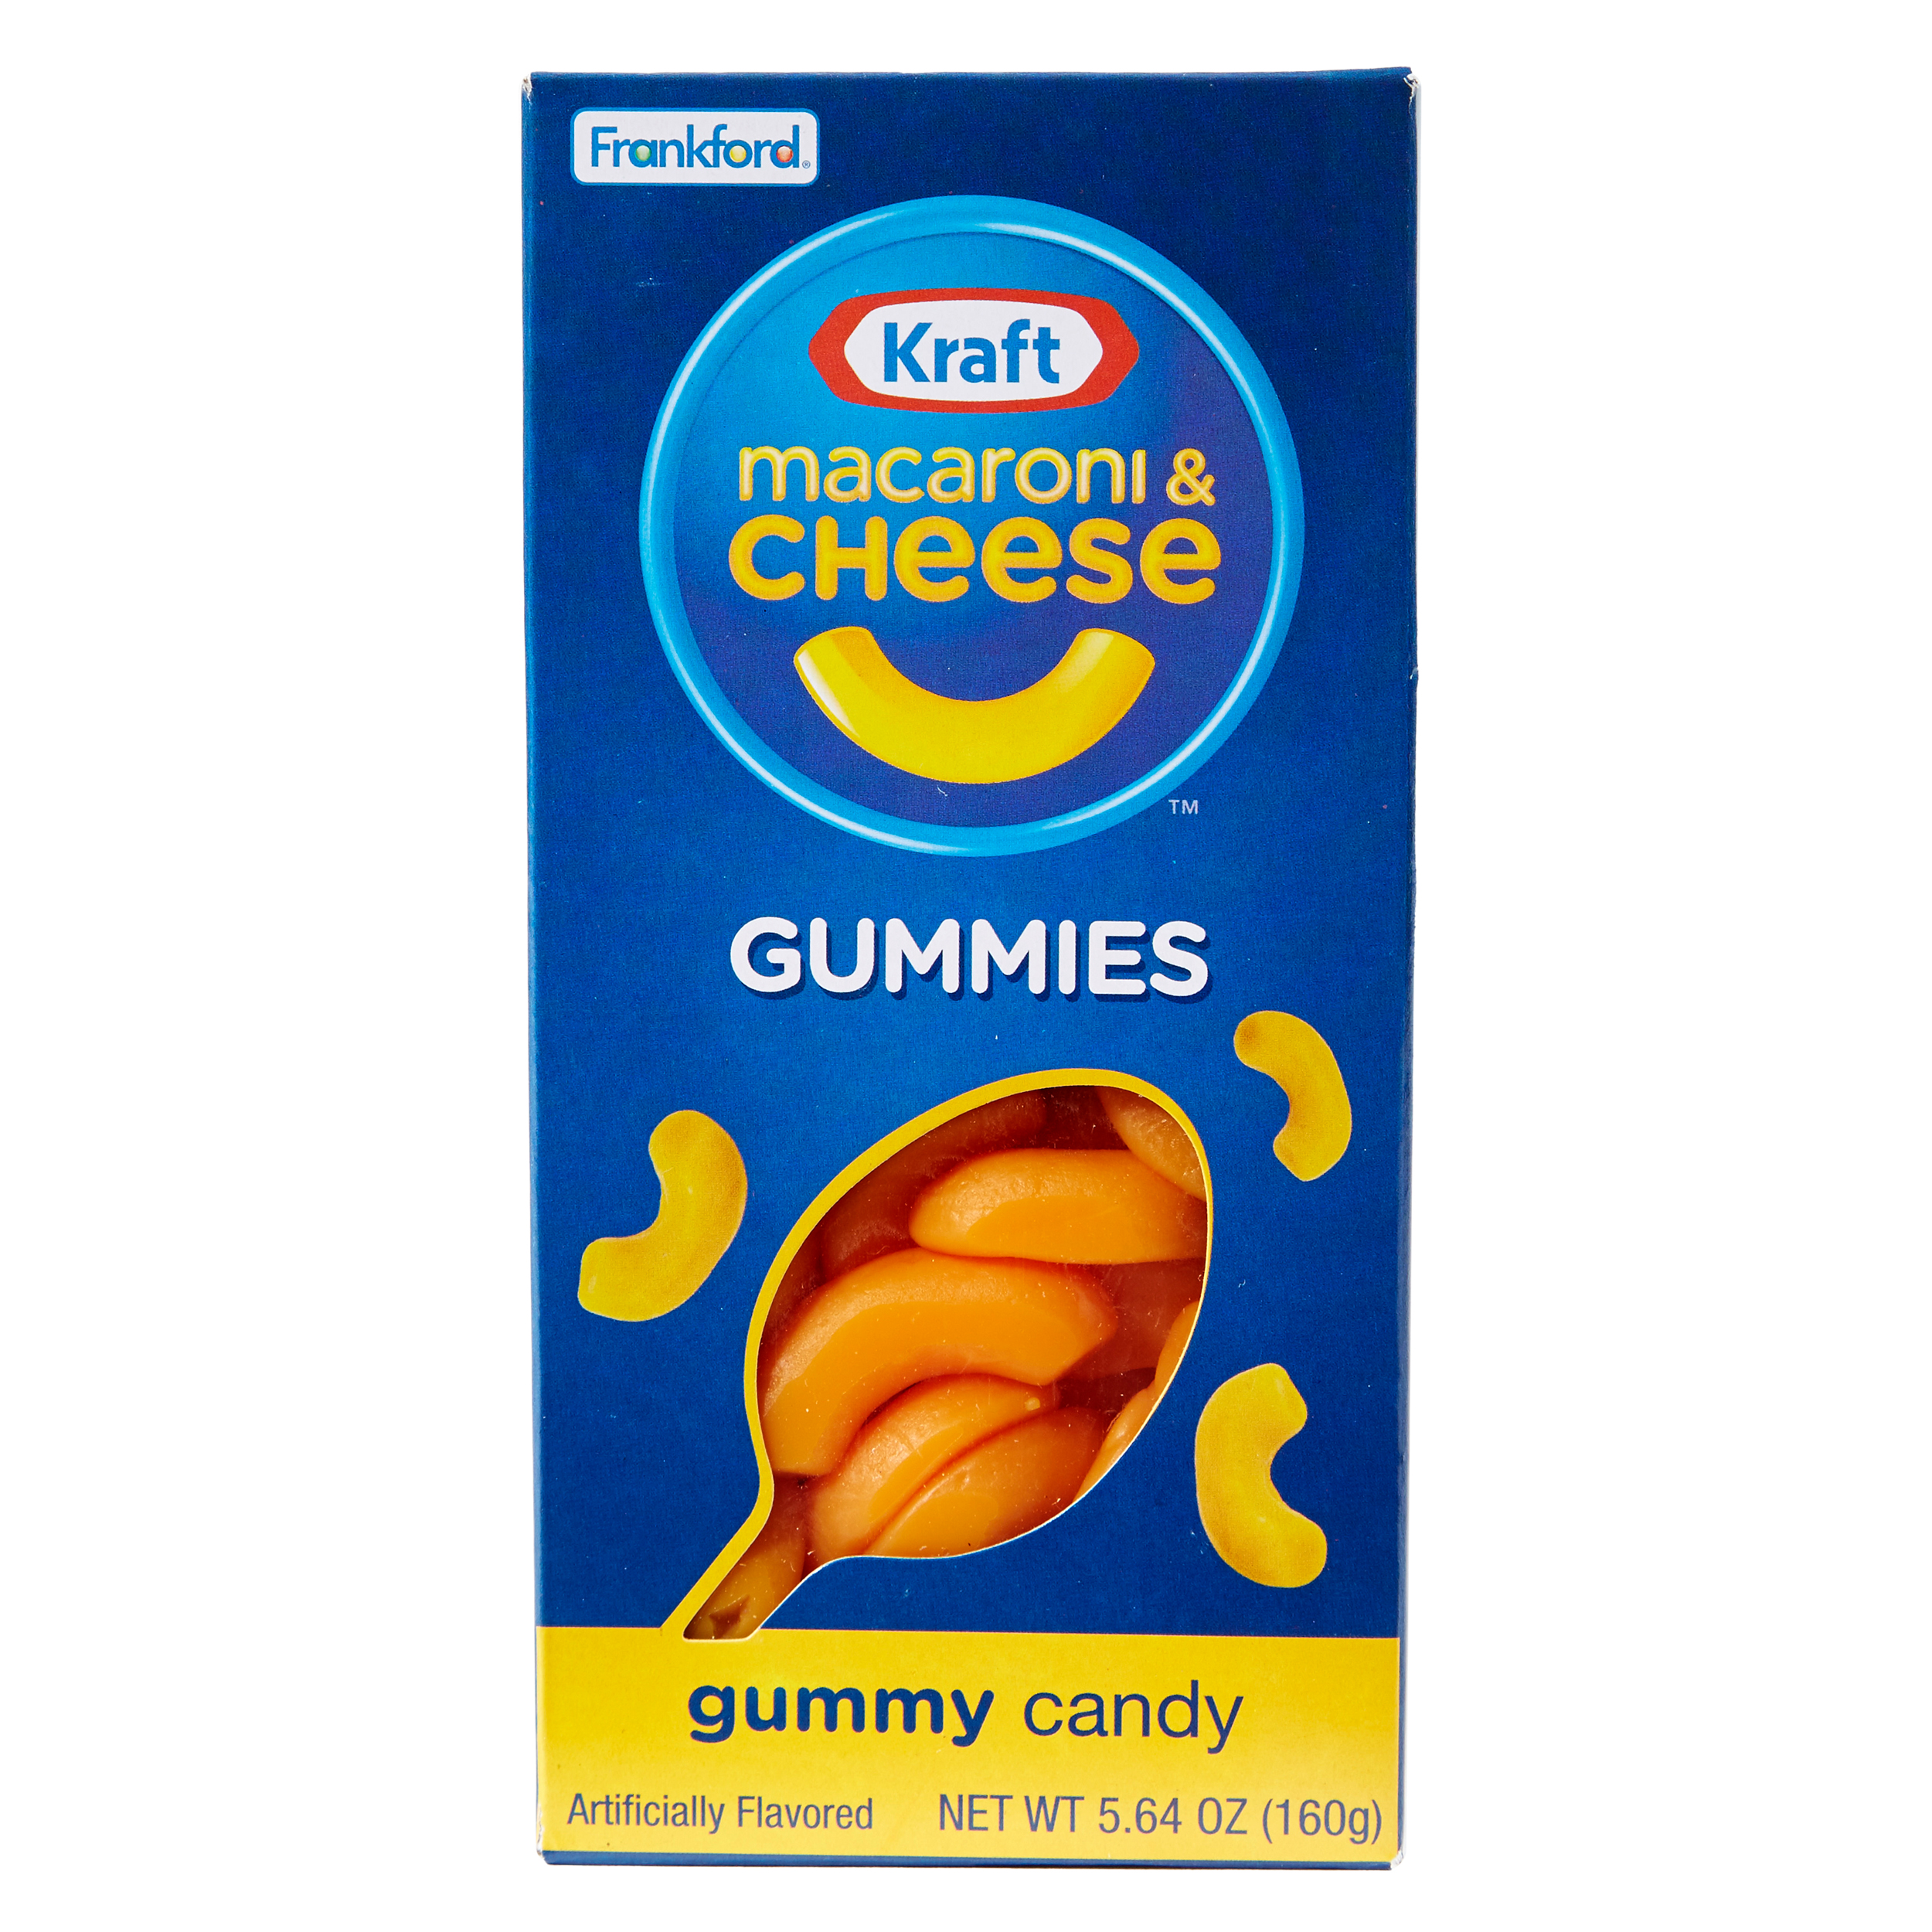 Frankford's Kraft Macaroni & Cheese Gummy Candy Theater Box, 5.64 Ounces - image 1 of 5